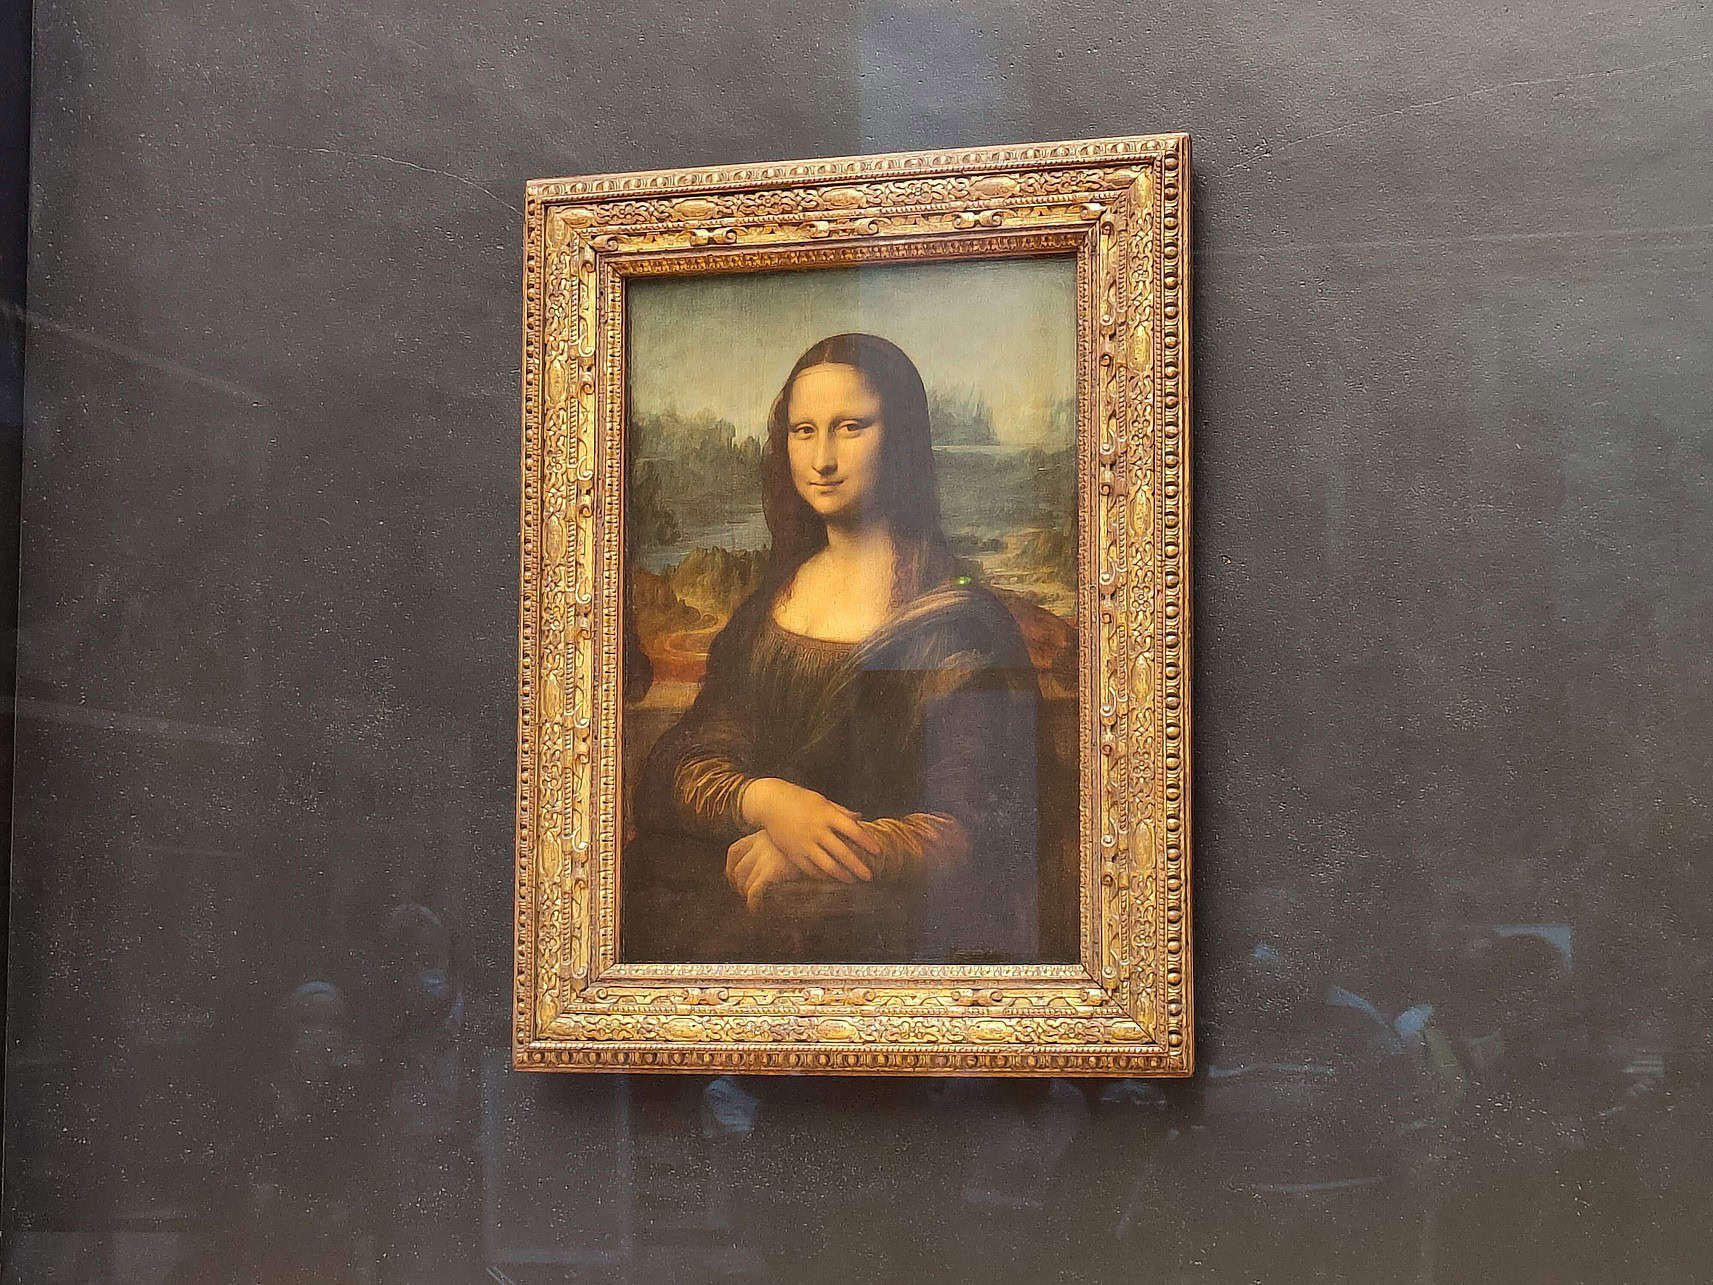 The Mona Lisa in The Louvre Musuem in Paris, France